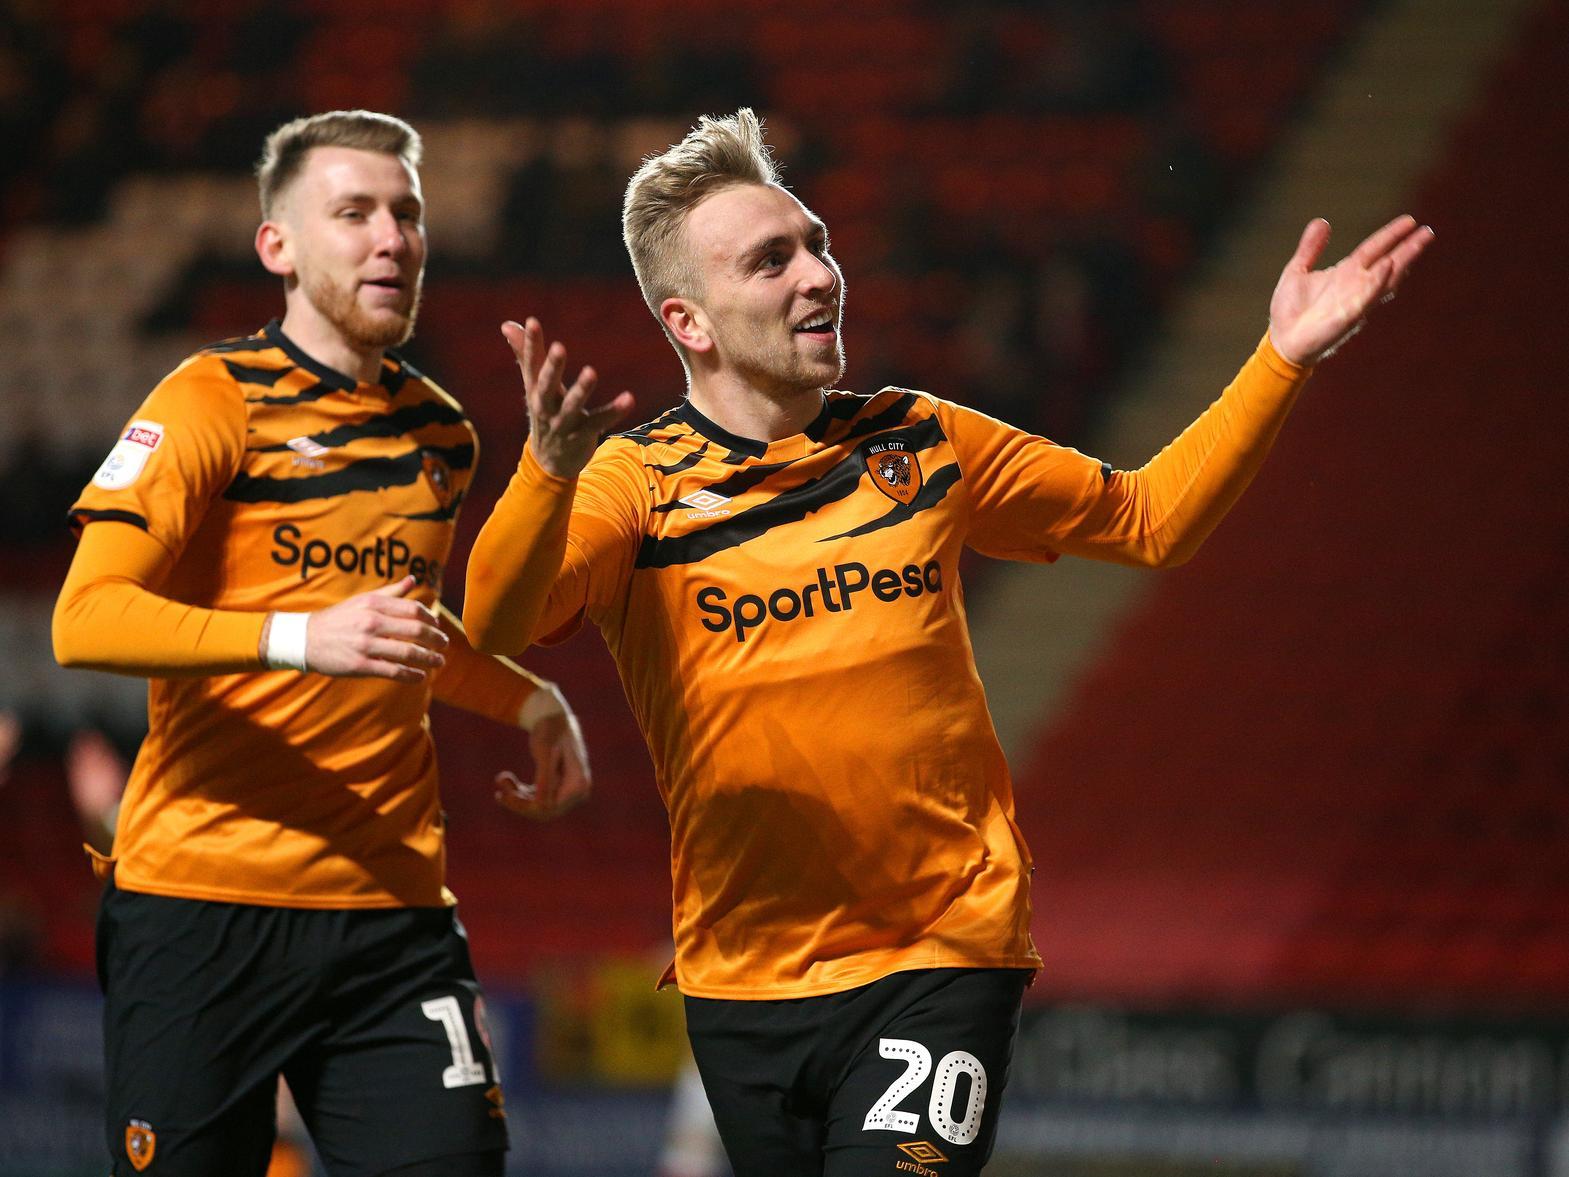 Following suggestions that Leeds United could pursue a January move for Hull City's Jarrod Bowen, the bookies have slashed their odds down to 5/2 second favourites to sign the 17-goal sensation this month. (Sky Bet)